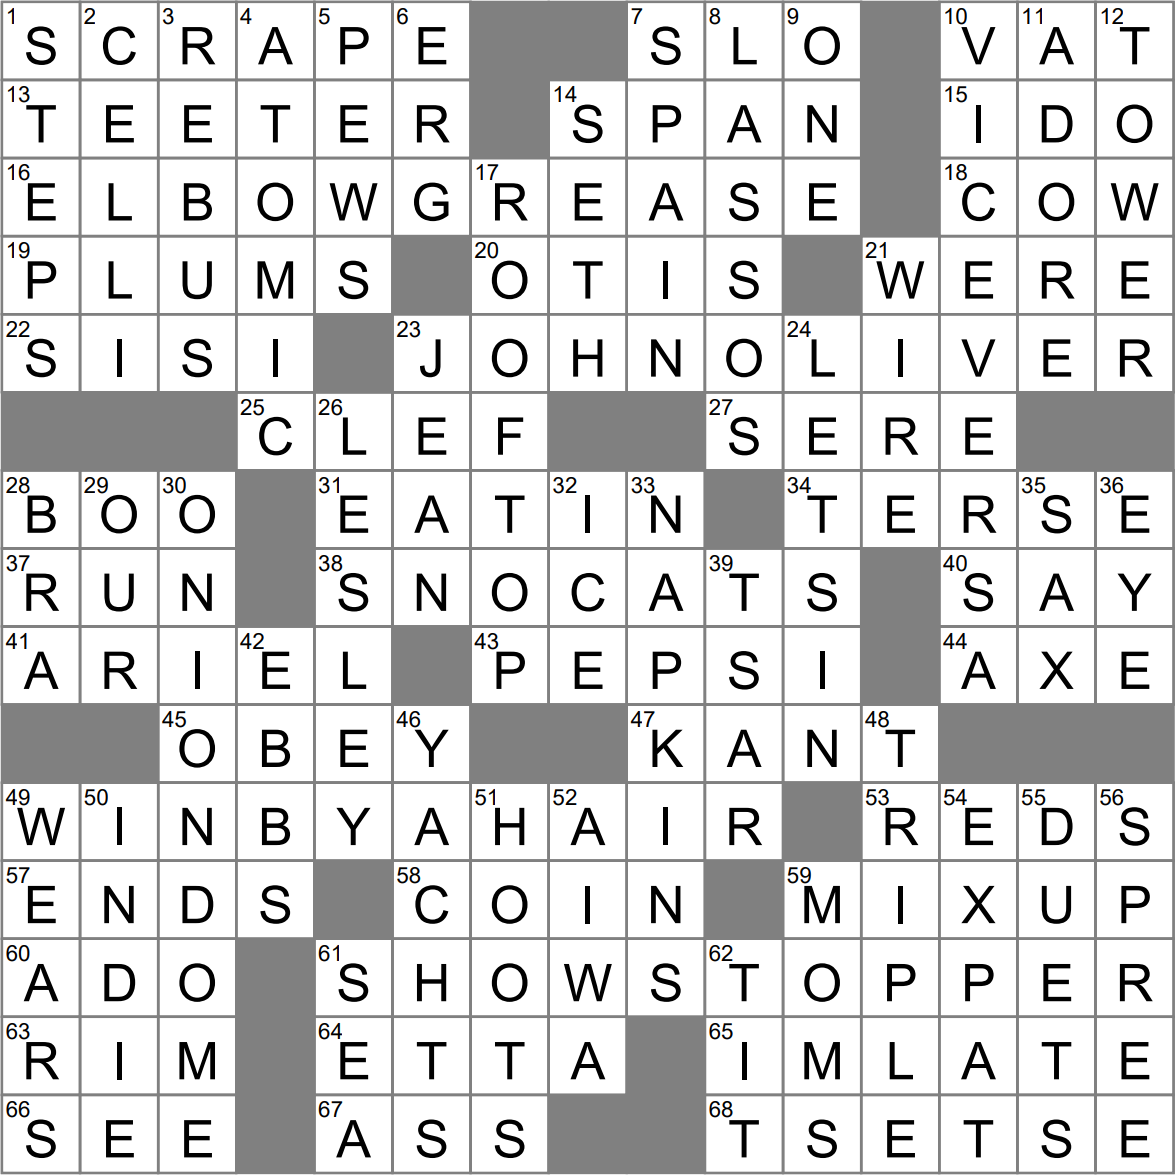 Brand's Crossword Game King's Cup - Wikipedia